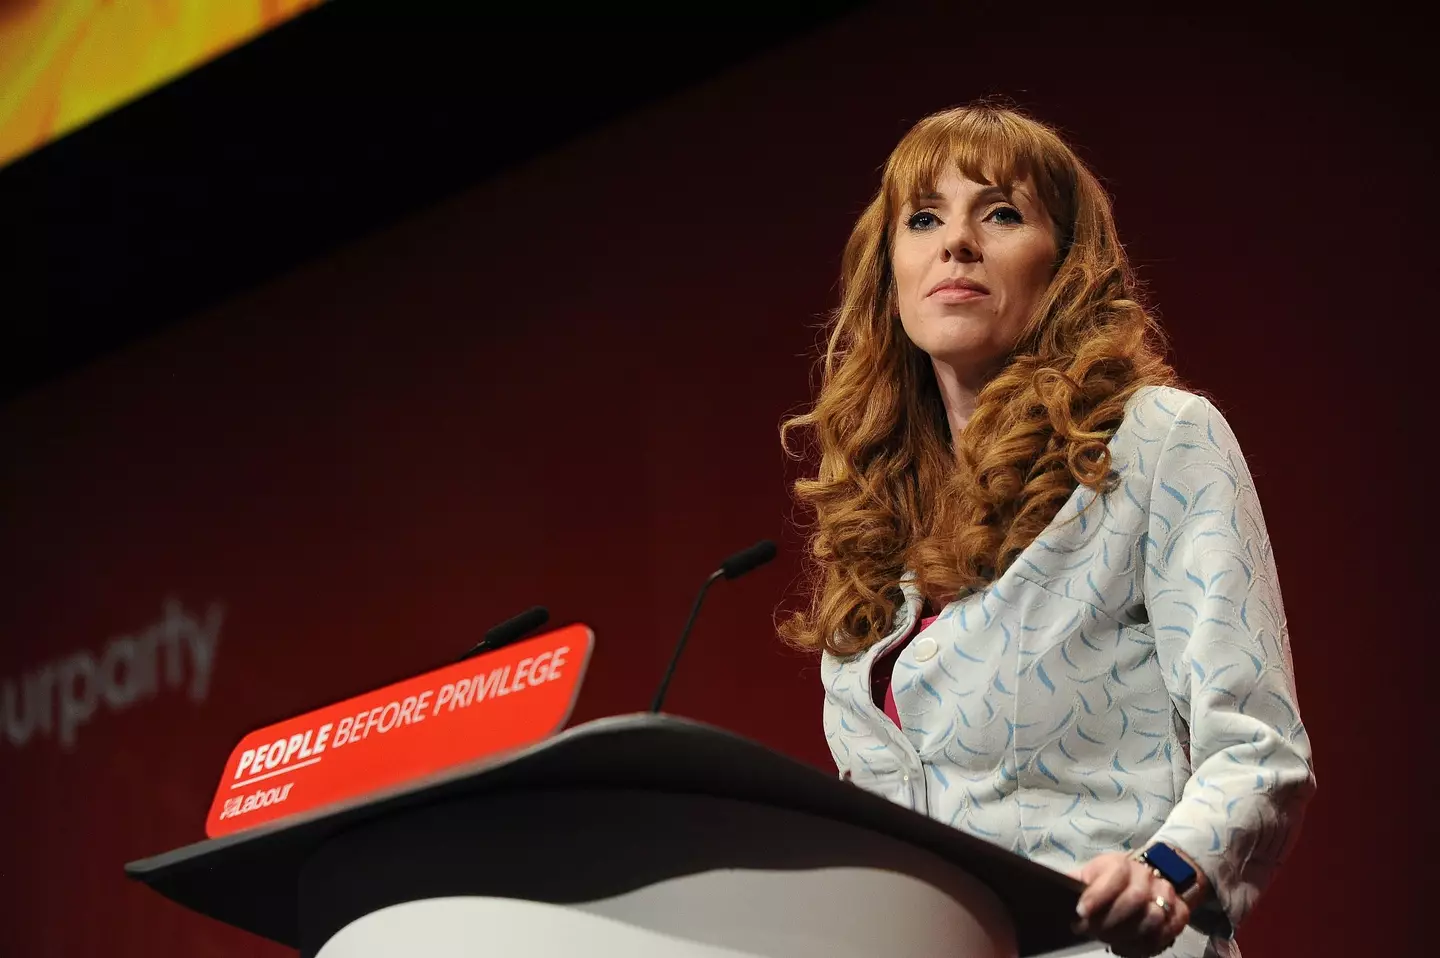 Labour MP Angela Rayner has hit back at 'sexist' claims made about her.